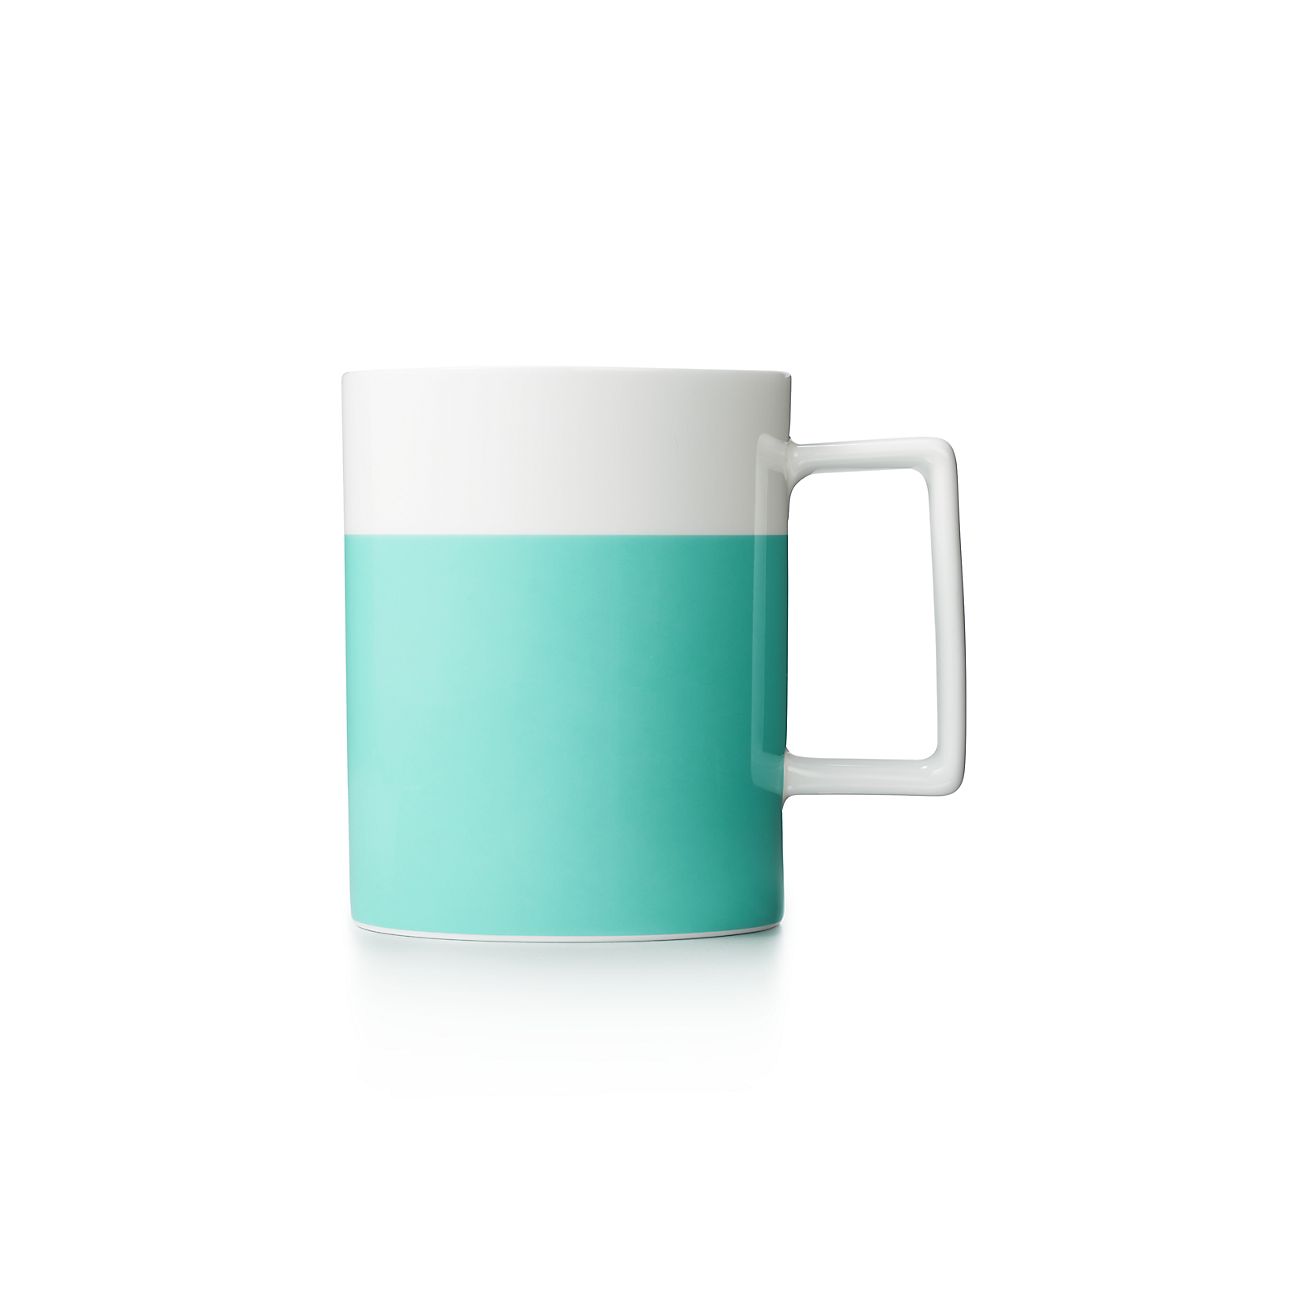 tiffany & co cup